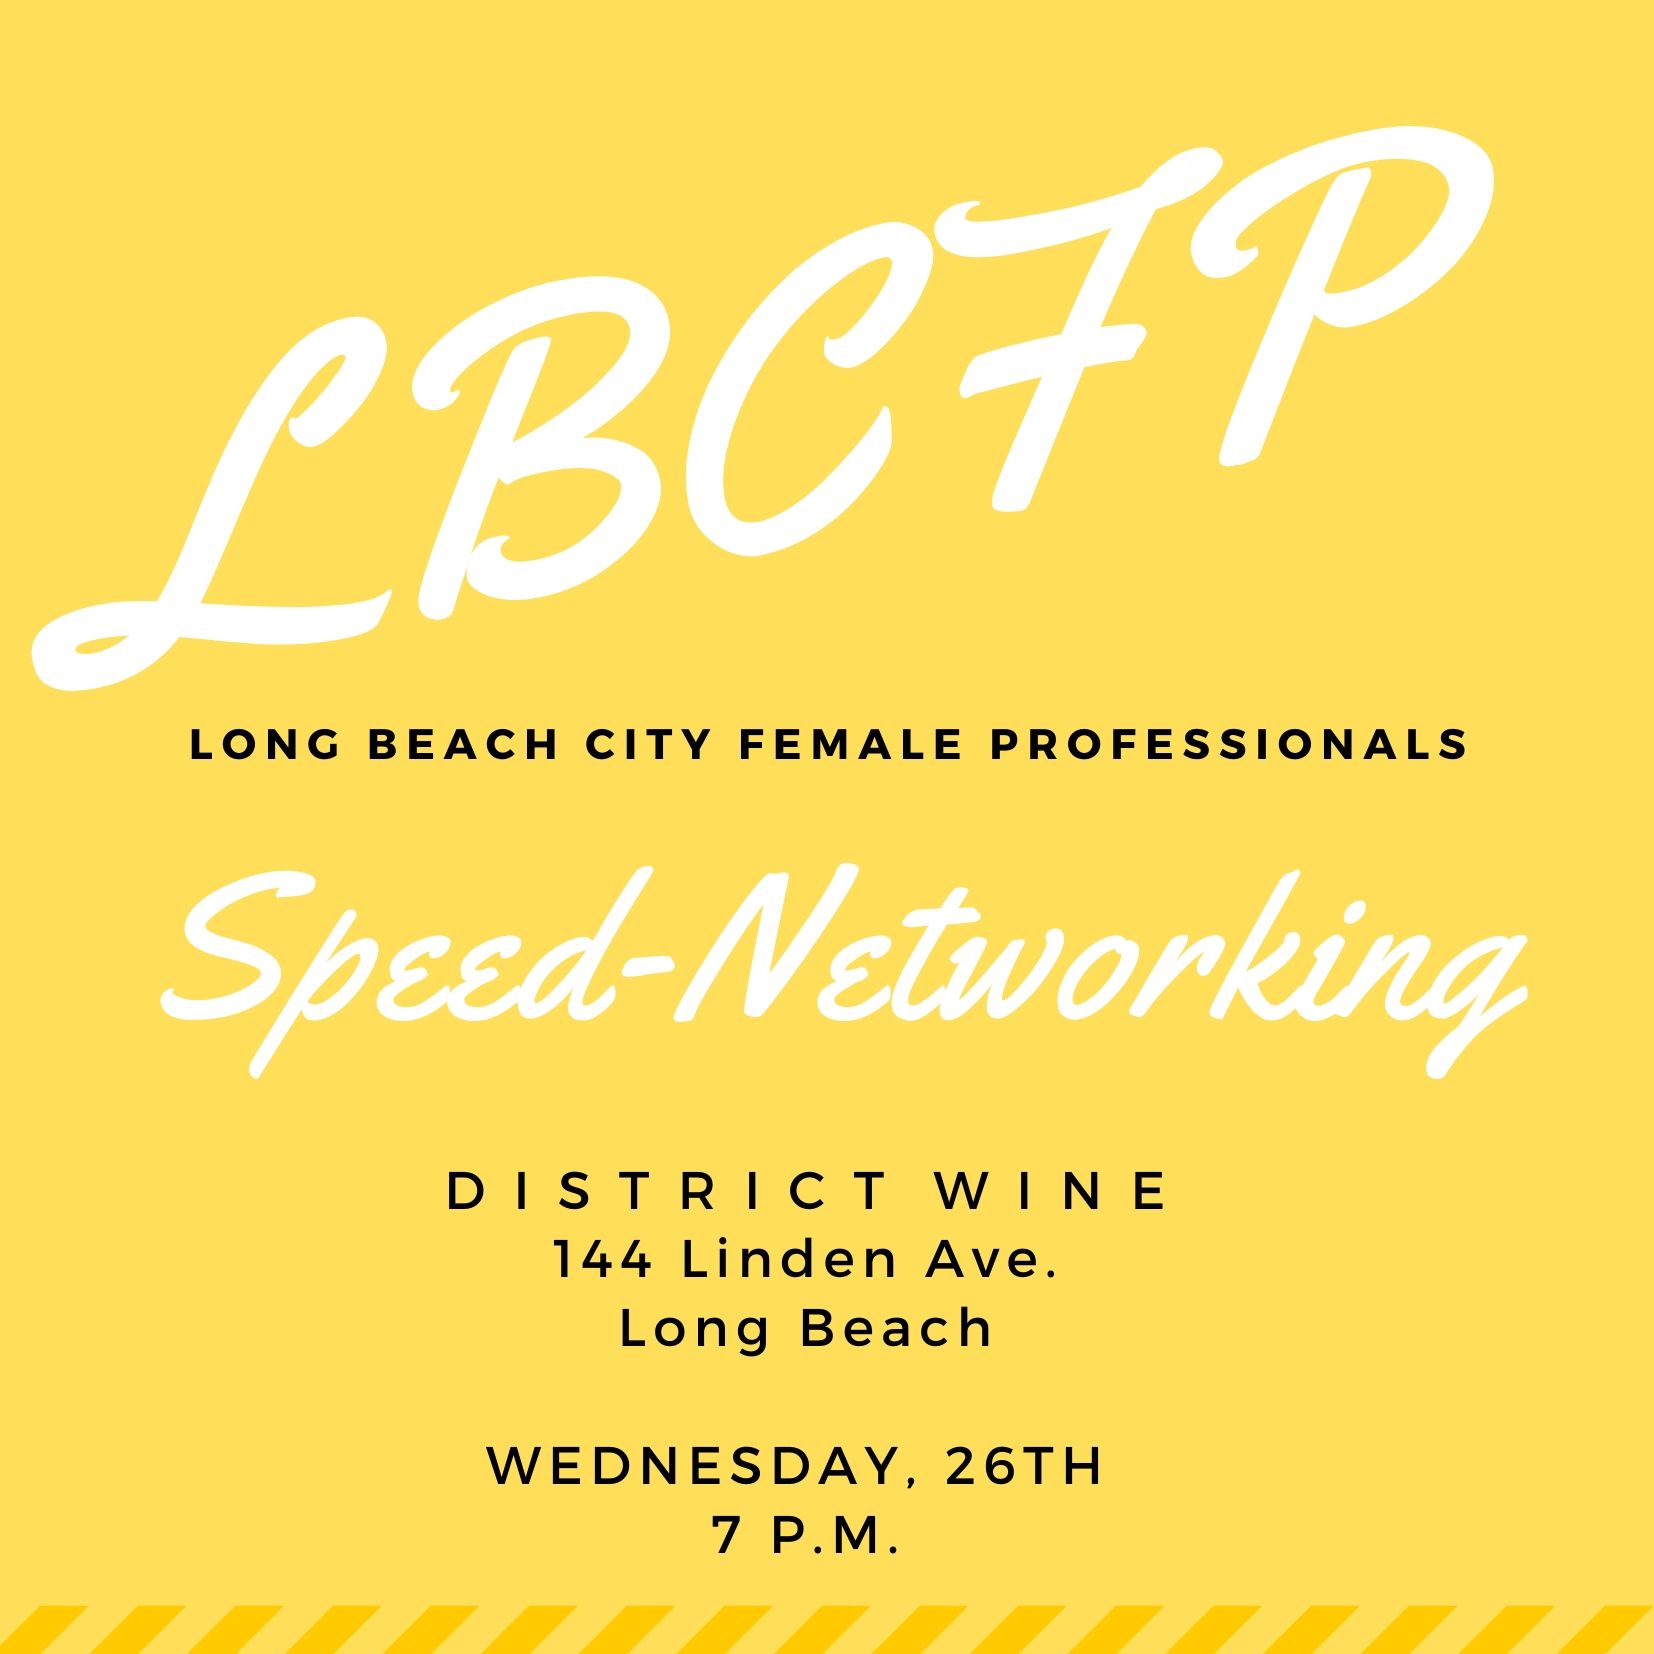 Long Beach City Female Professionals Speed-Networking